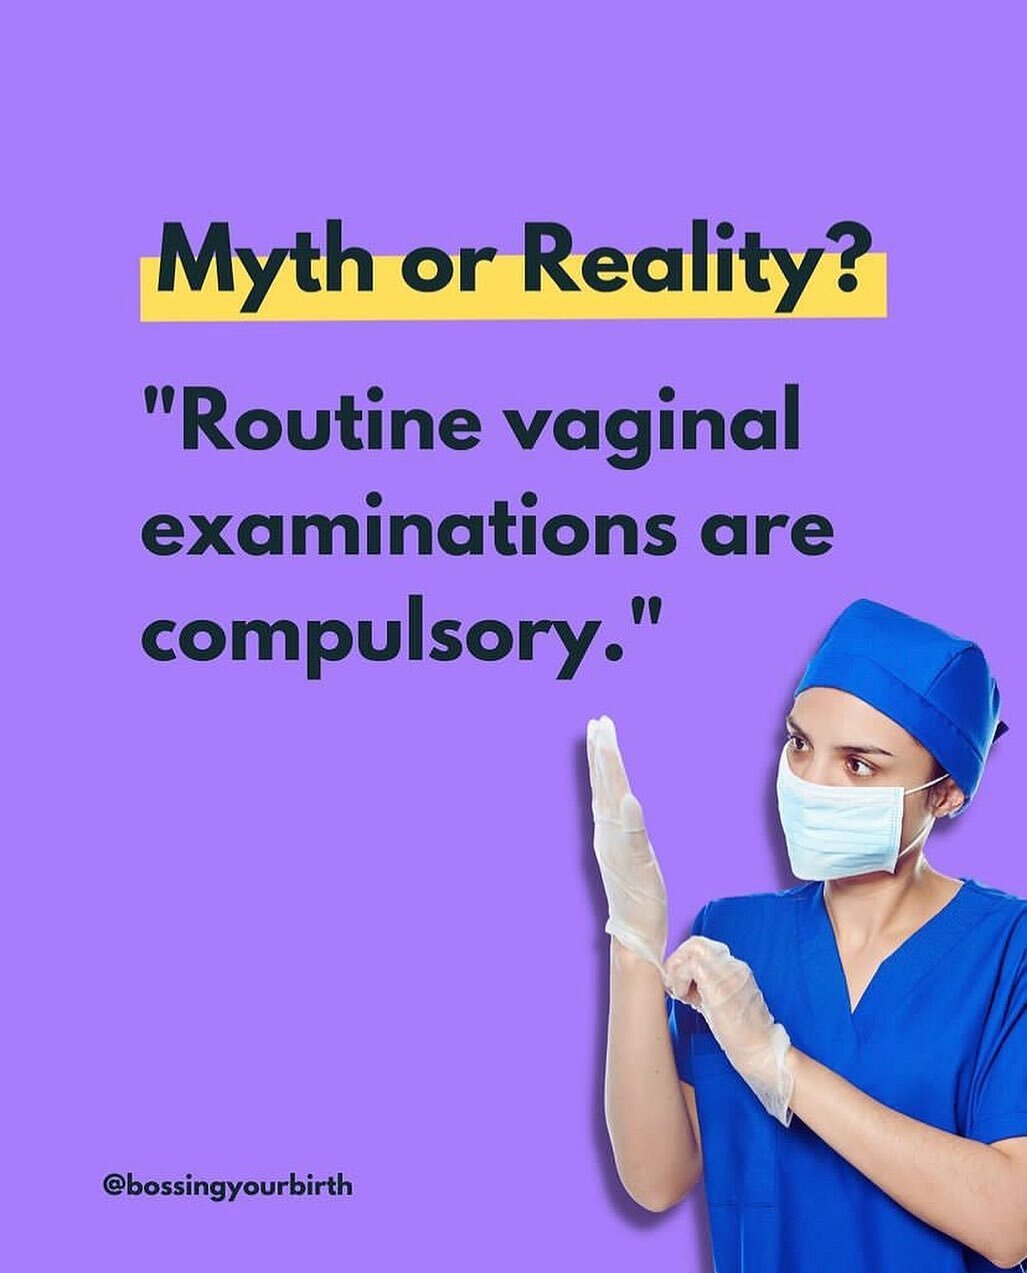 Do you know the answer? ⤵️
&bull;
&bull;

You do NOT have to have a vaginal examination (VE) at any point in your pregnancy or labour if you don't want it.

It's NHS policy to offer VEs during labour, but it's completely your choice if you want to ac